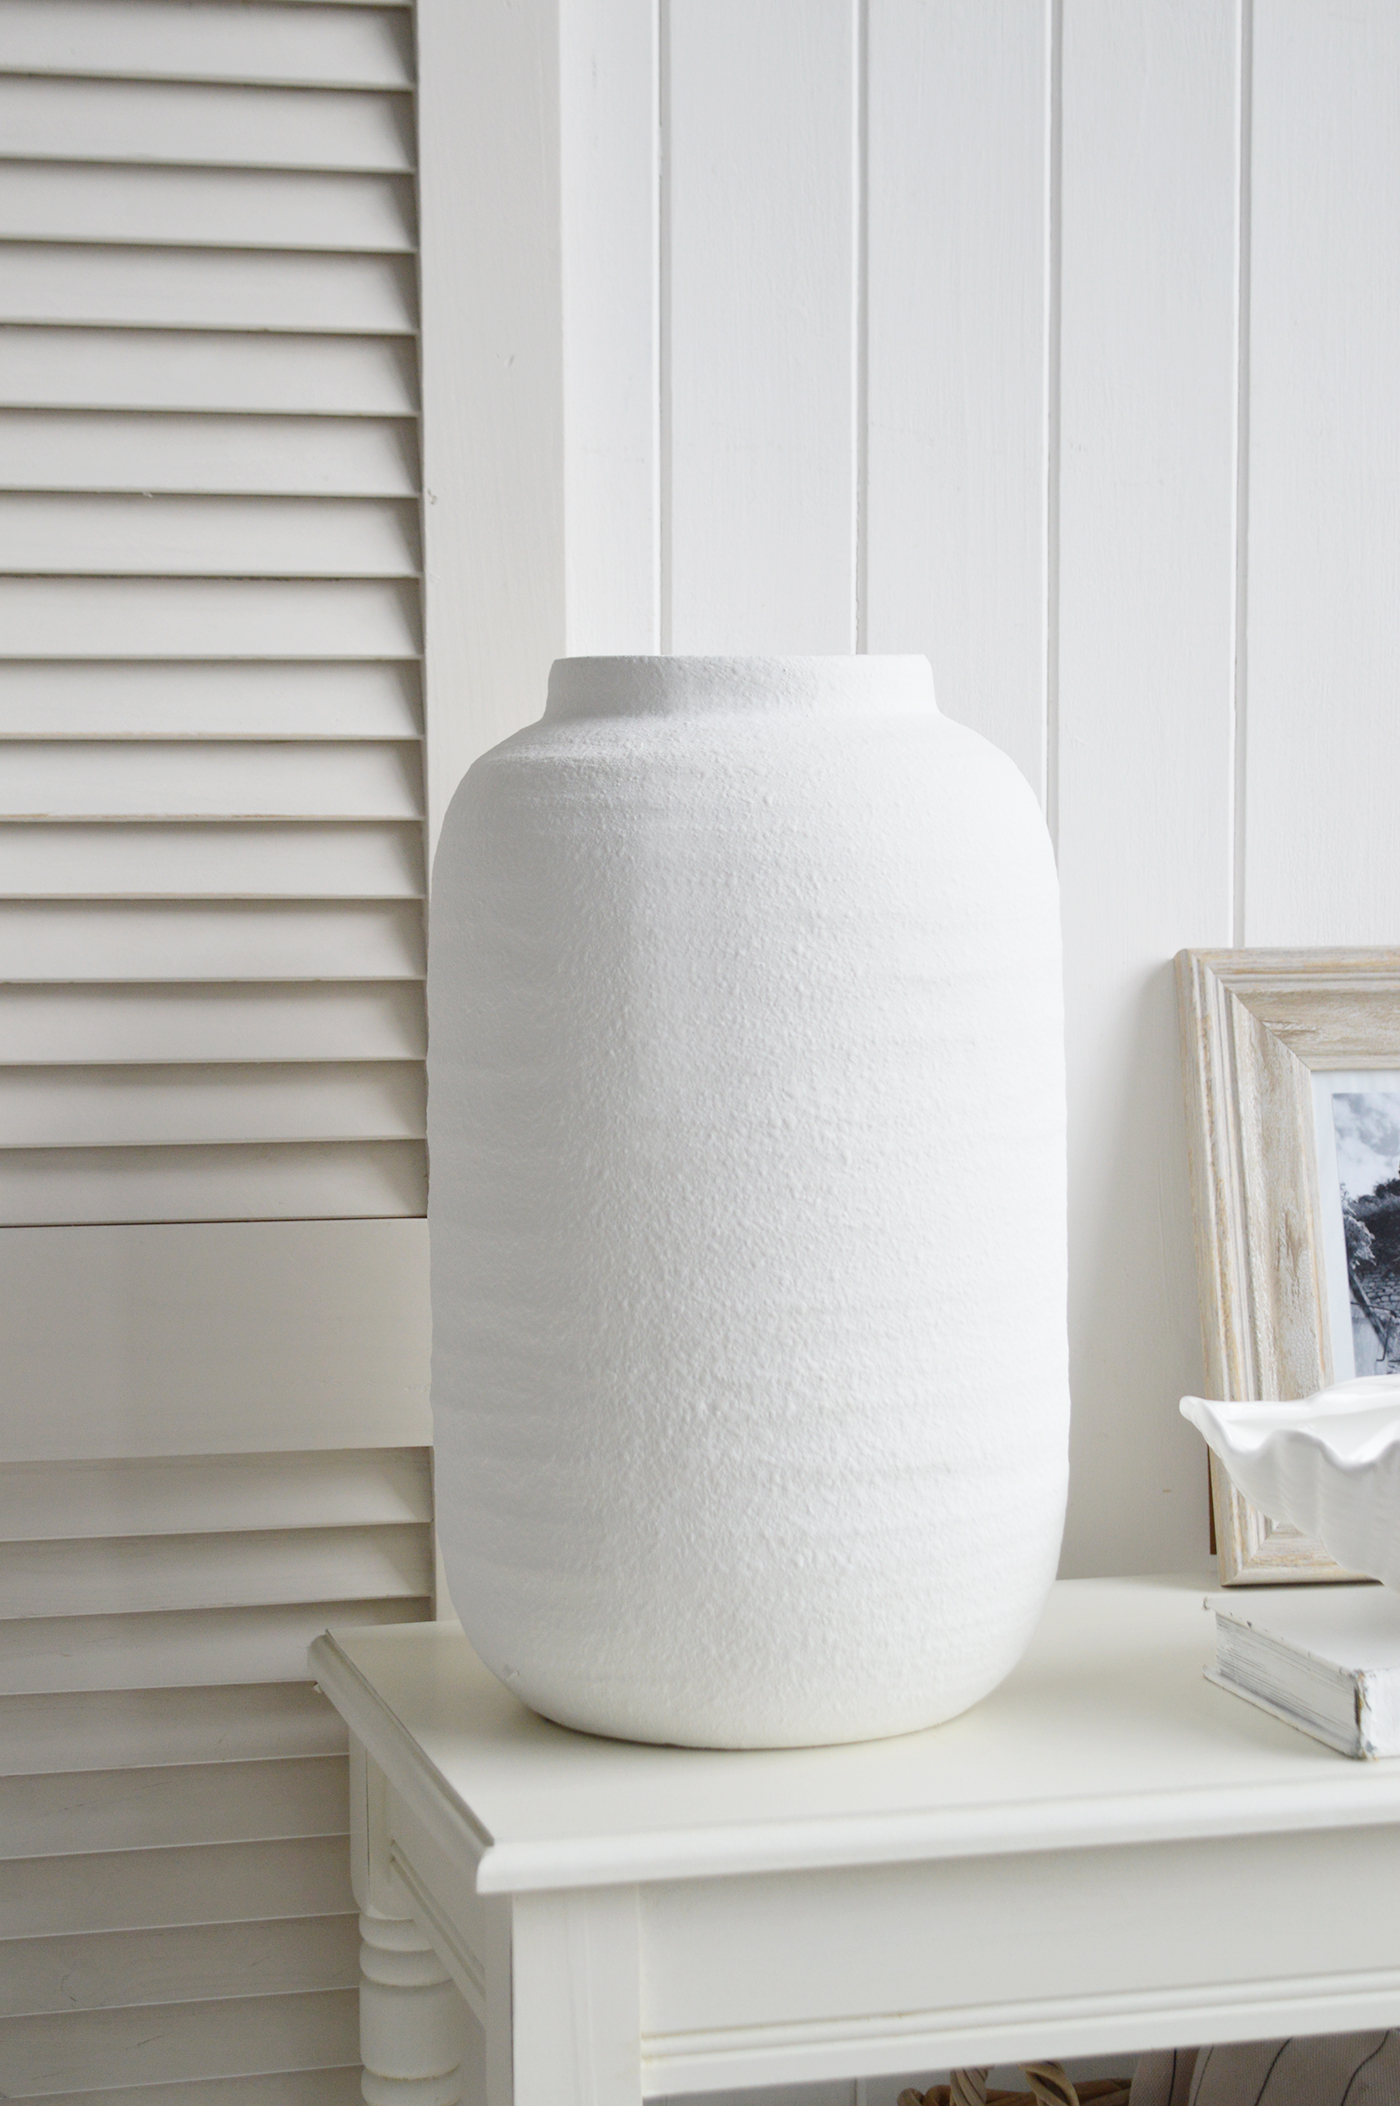 Putney Large Textured White Stone Vase - Coastal New England and Hamptons style homes an interiors